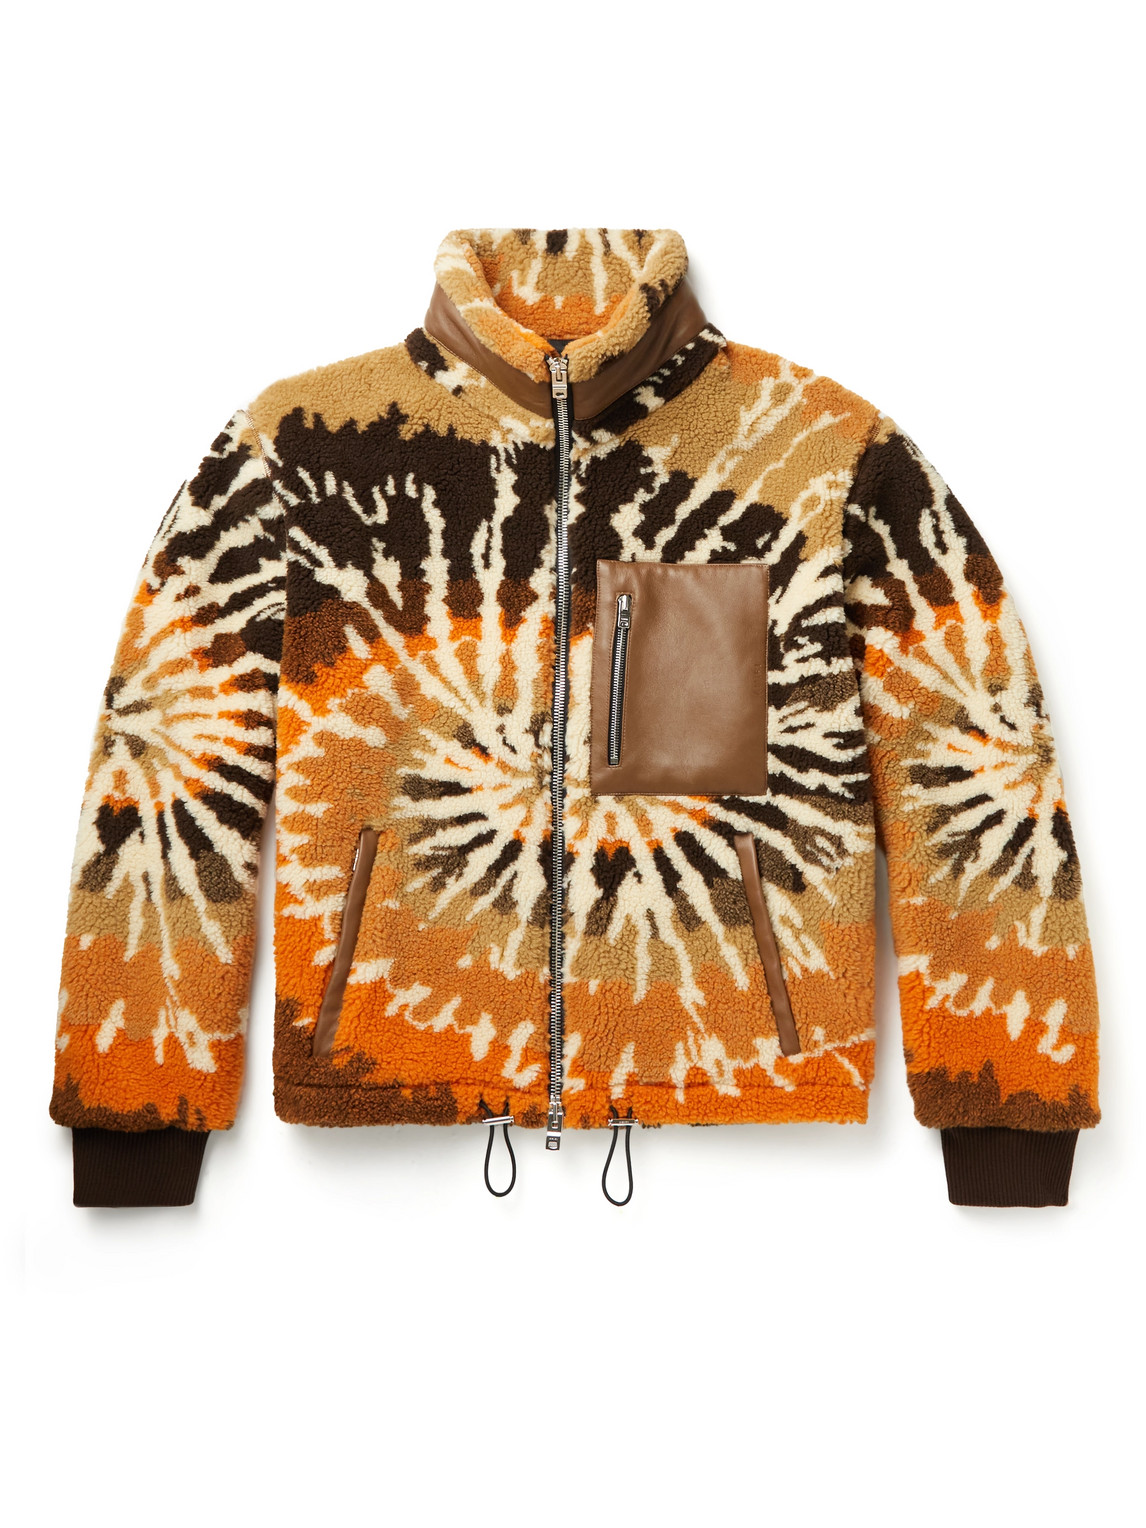 Leather-Trimmed Tie-Dyed Fleece Jacket